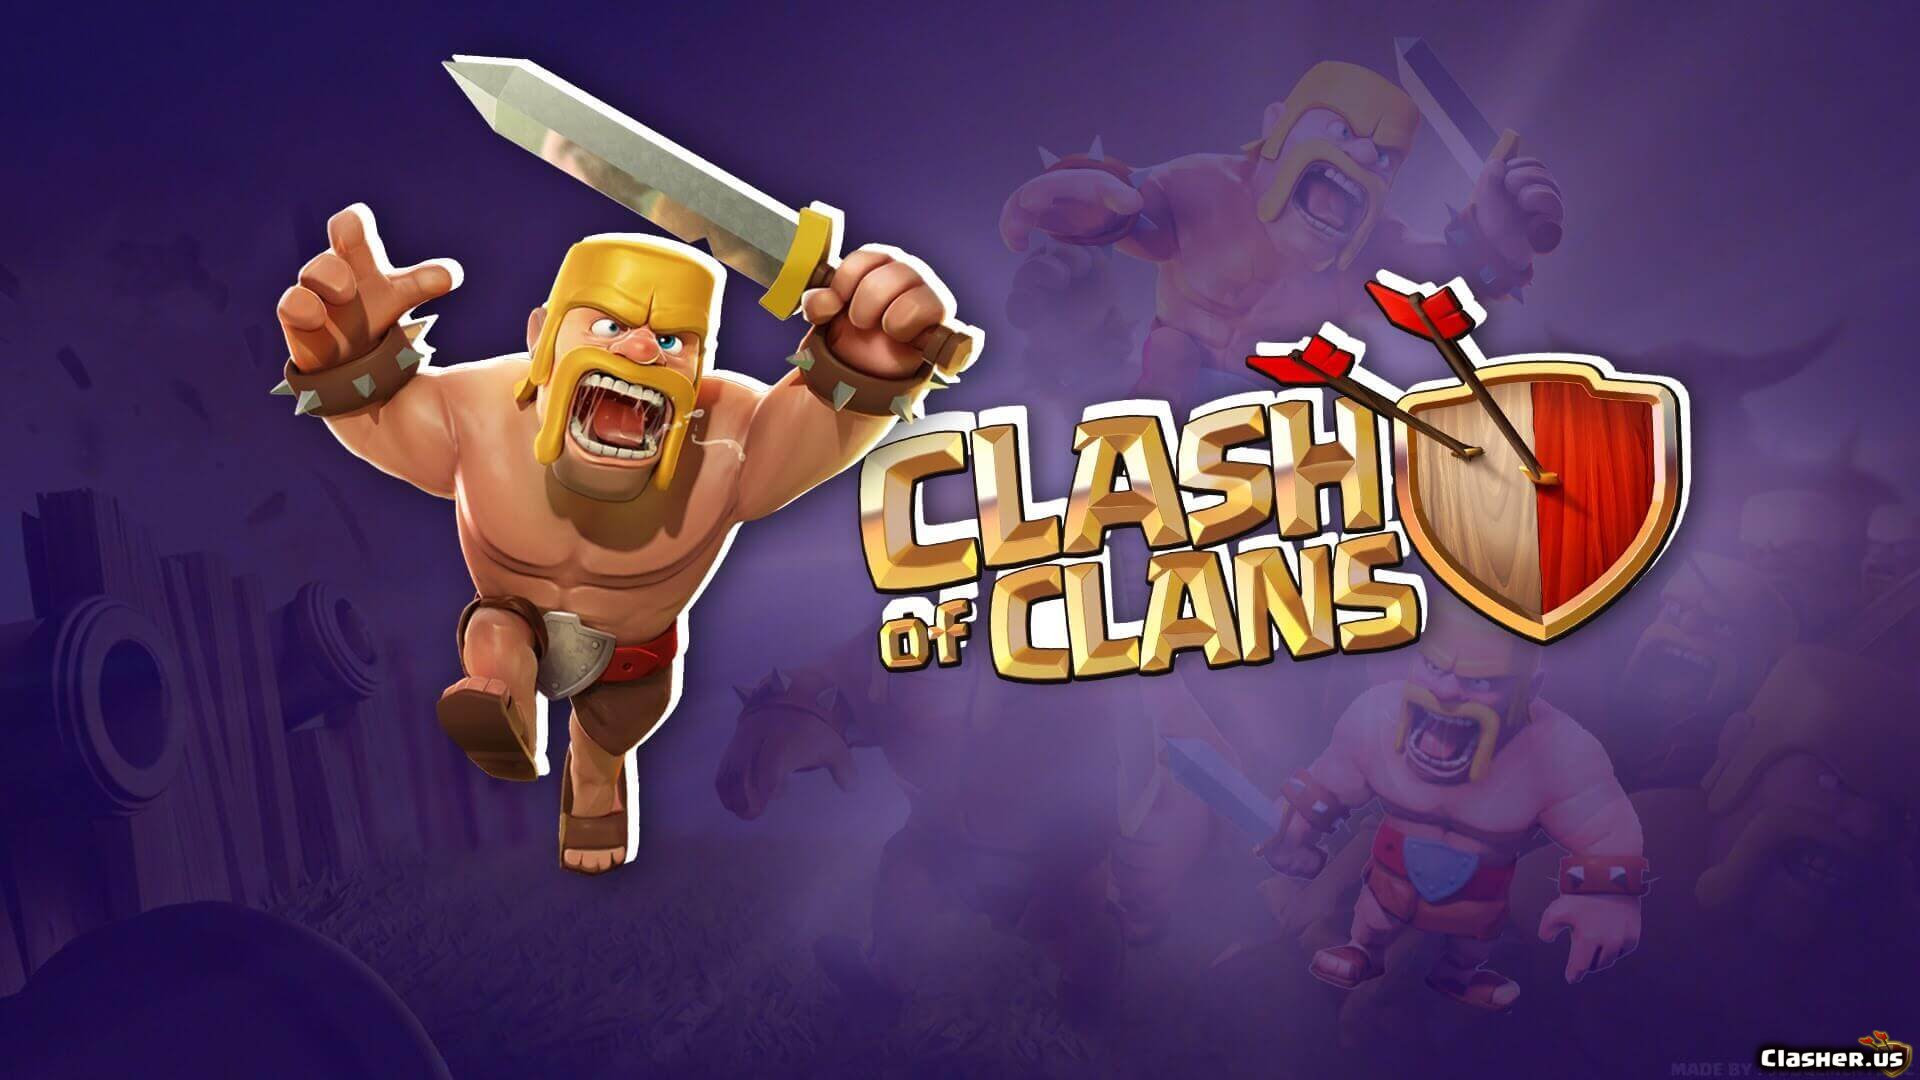 Barbarian Clash Of Clans Logo Clash Of Clans Wallpapers Clasher Us